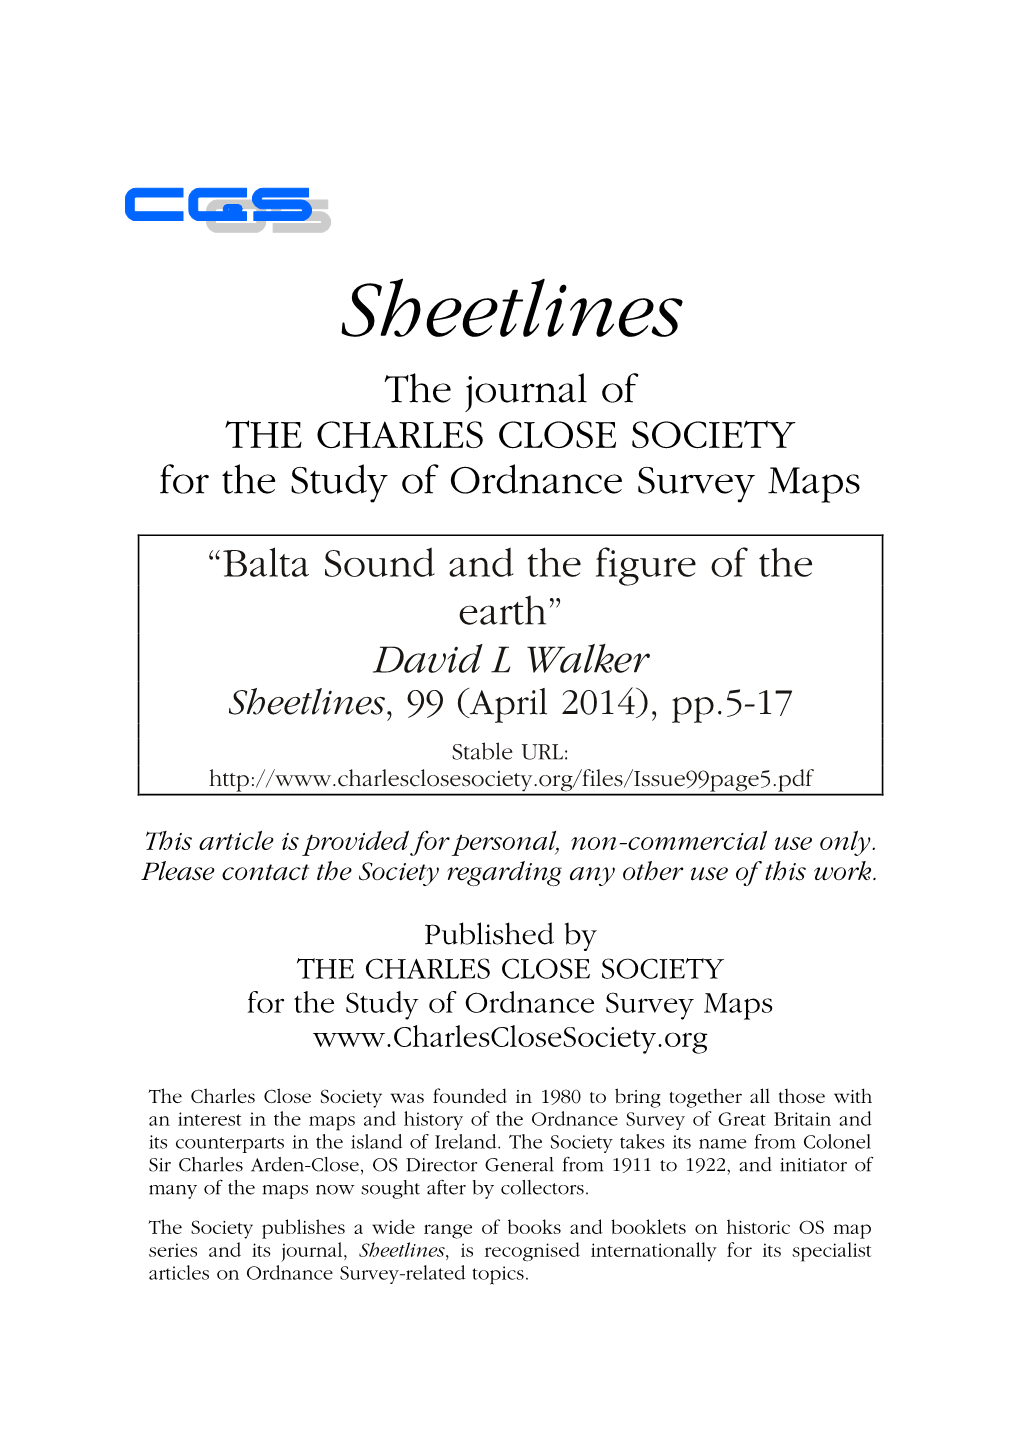 Balta Sound and the Figure of the Earth” David L Walker Sheetlines, 99 (April 2014), Pp.5-17 Stable URL